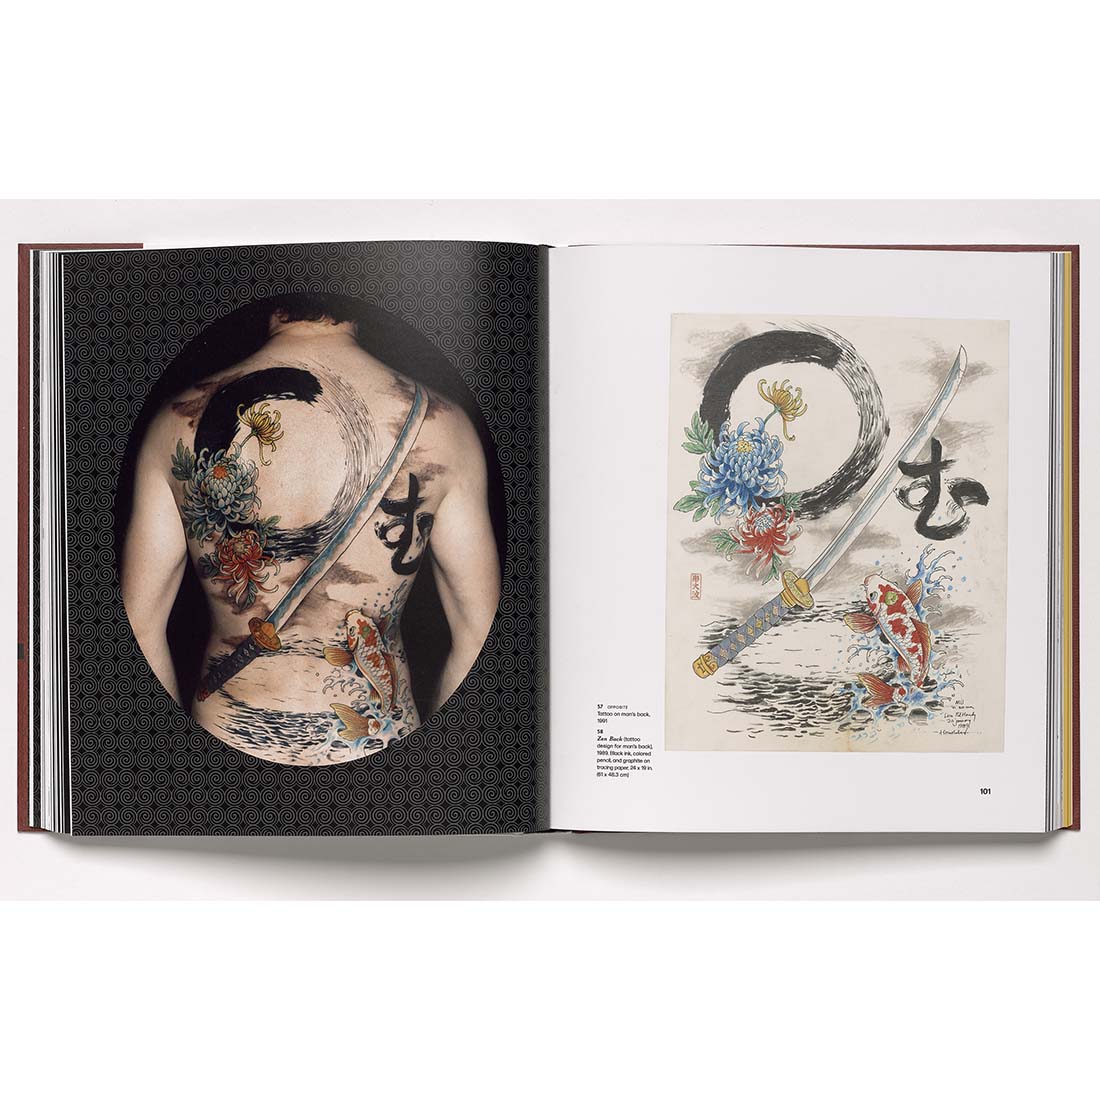 Ed Hardy: Deeper Than Skin - de Young & Legion of Honor Museum Stores